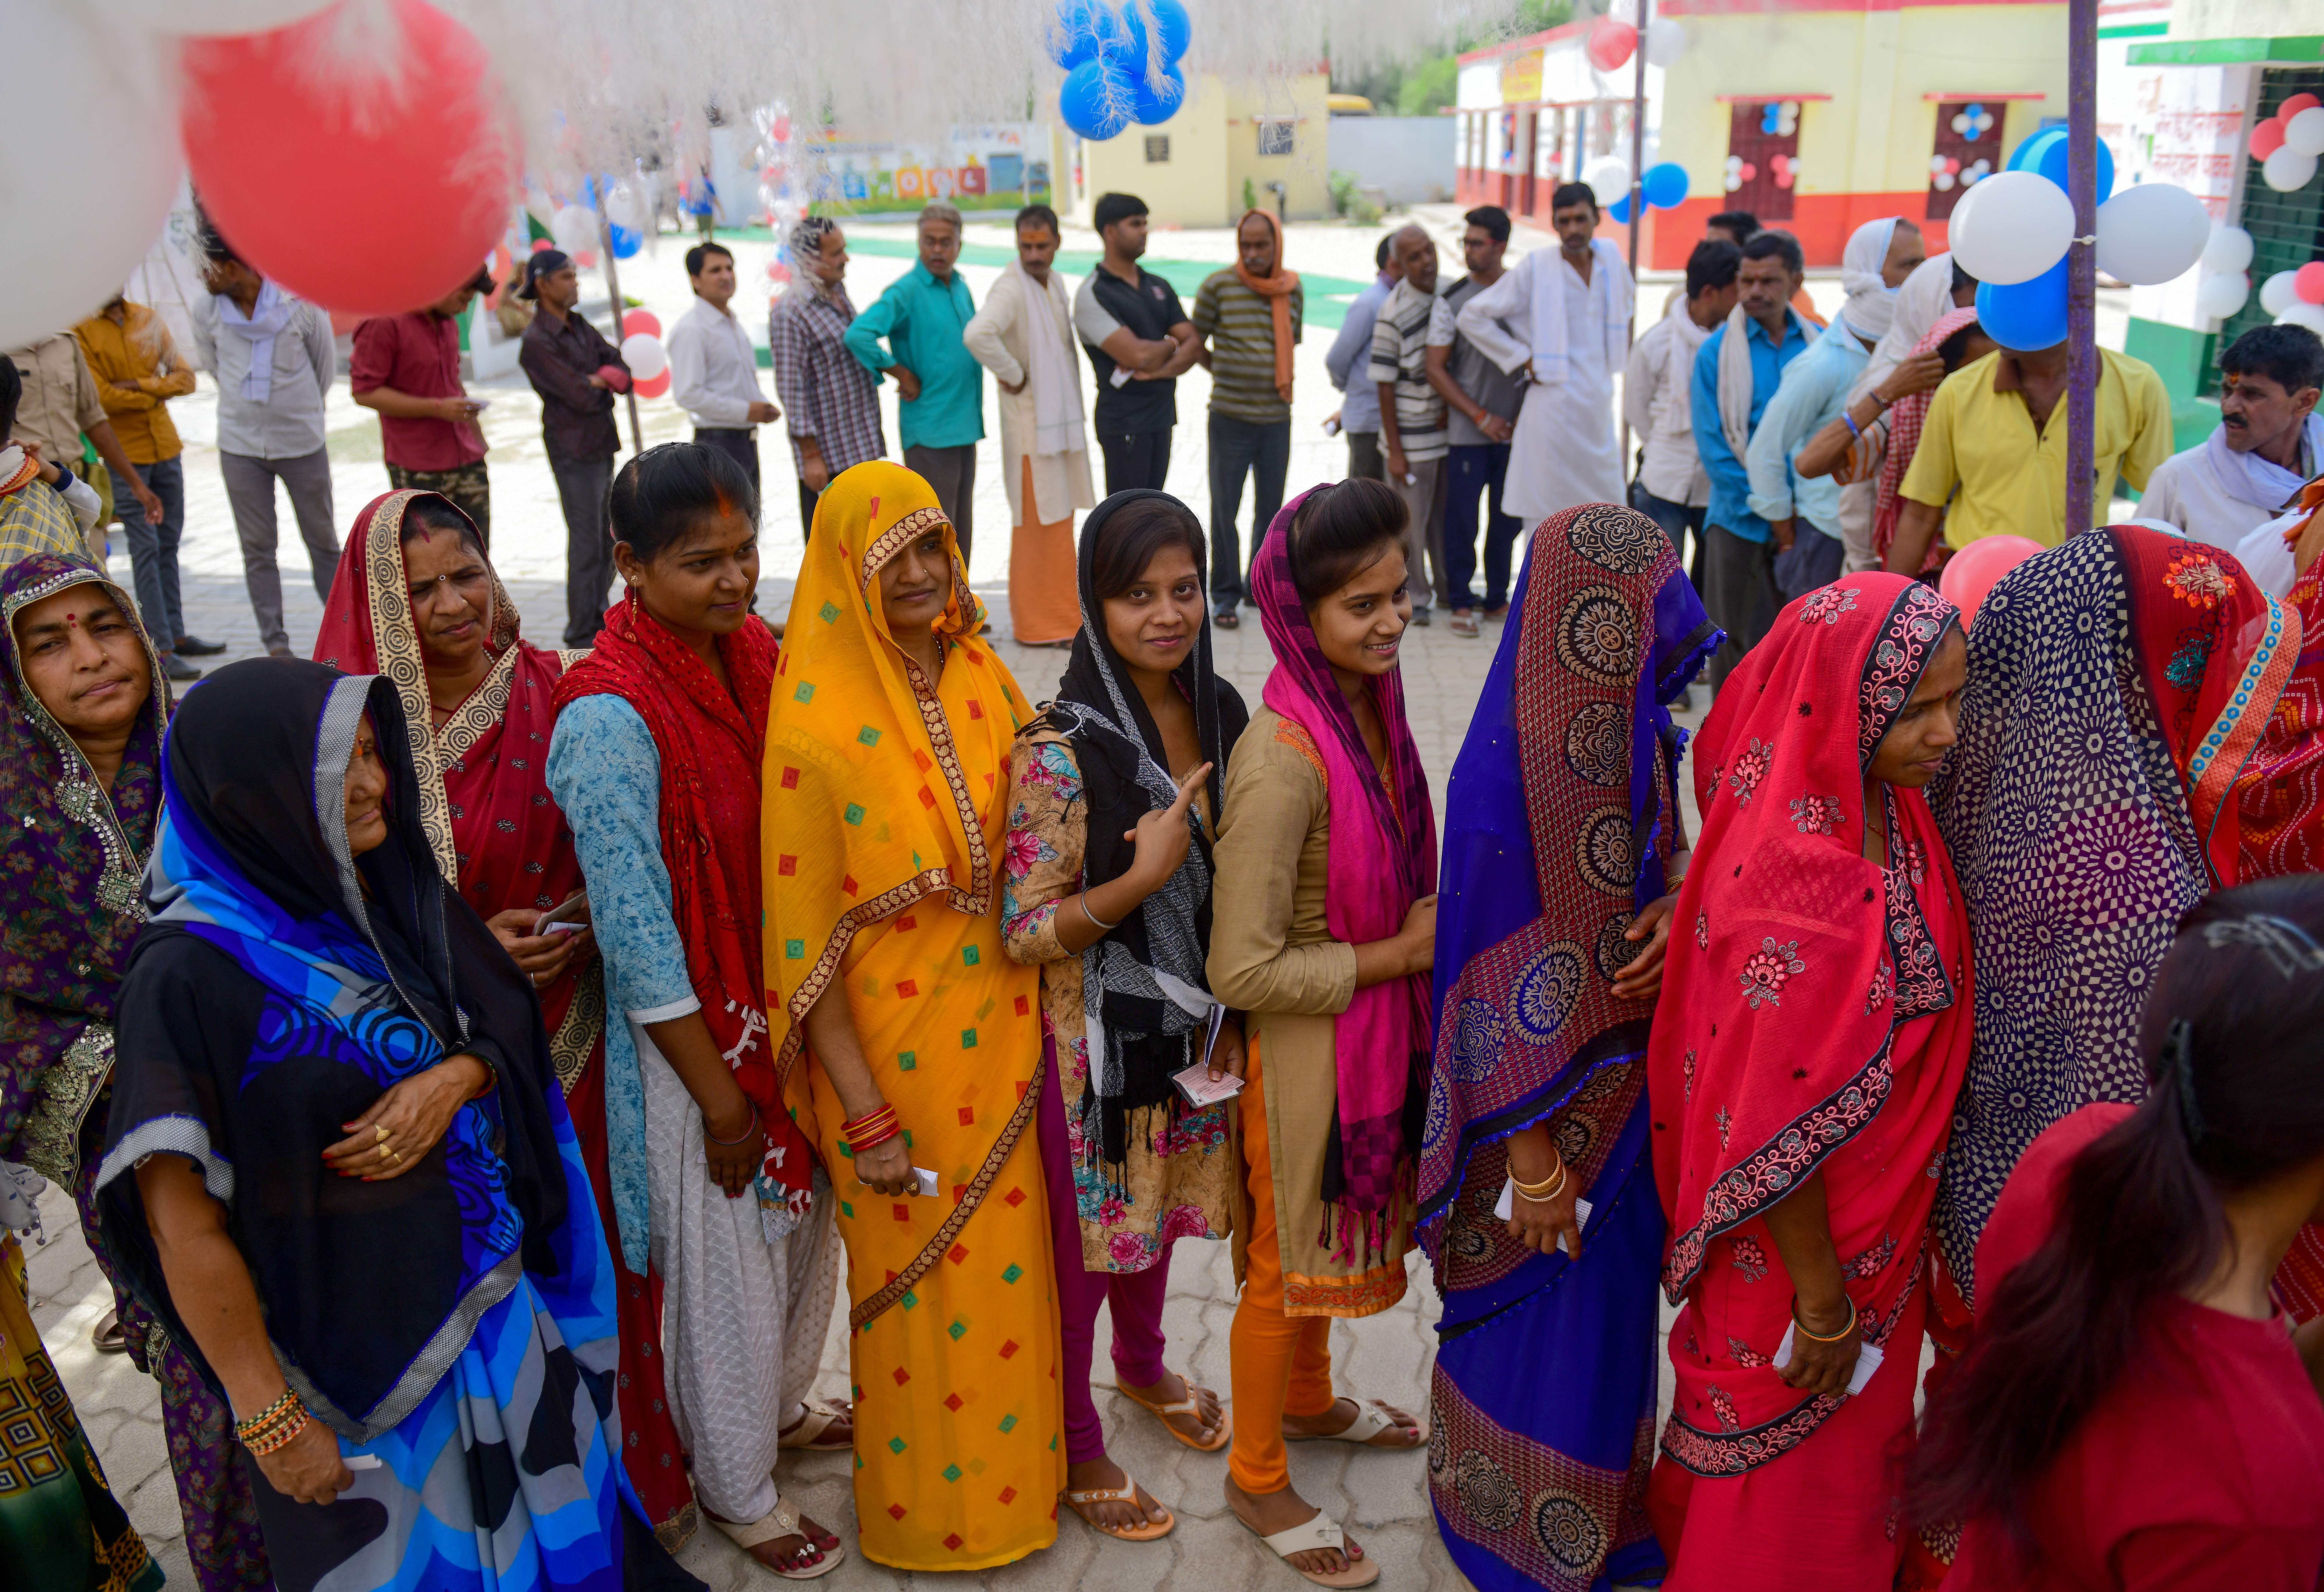 Voters queue at a polling station in Allahabad in Uttar Pradesh state on May 12, 2019.